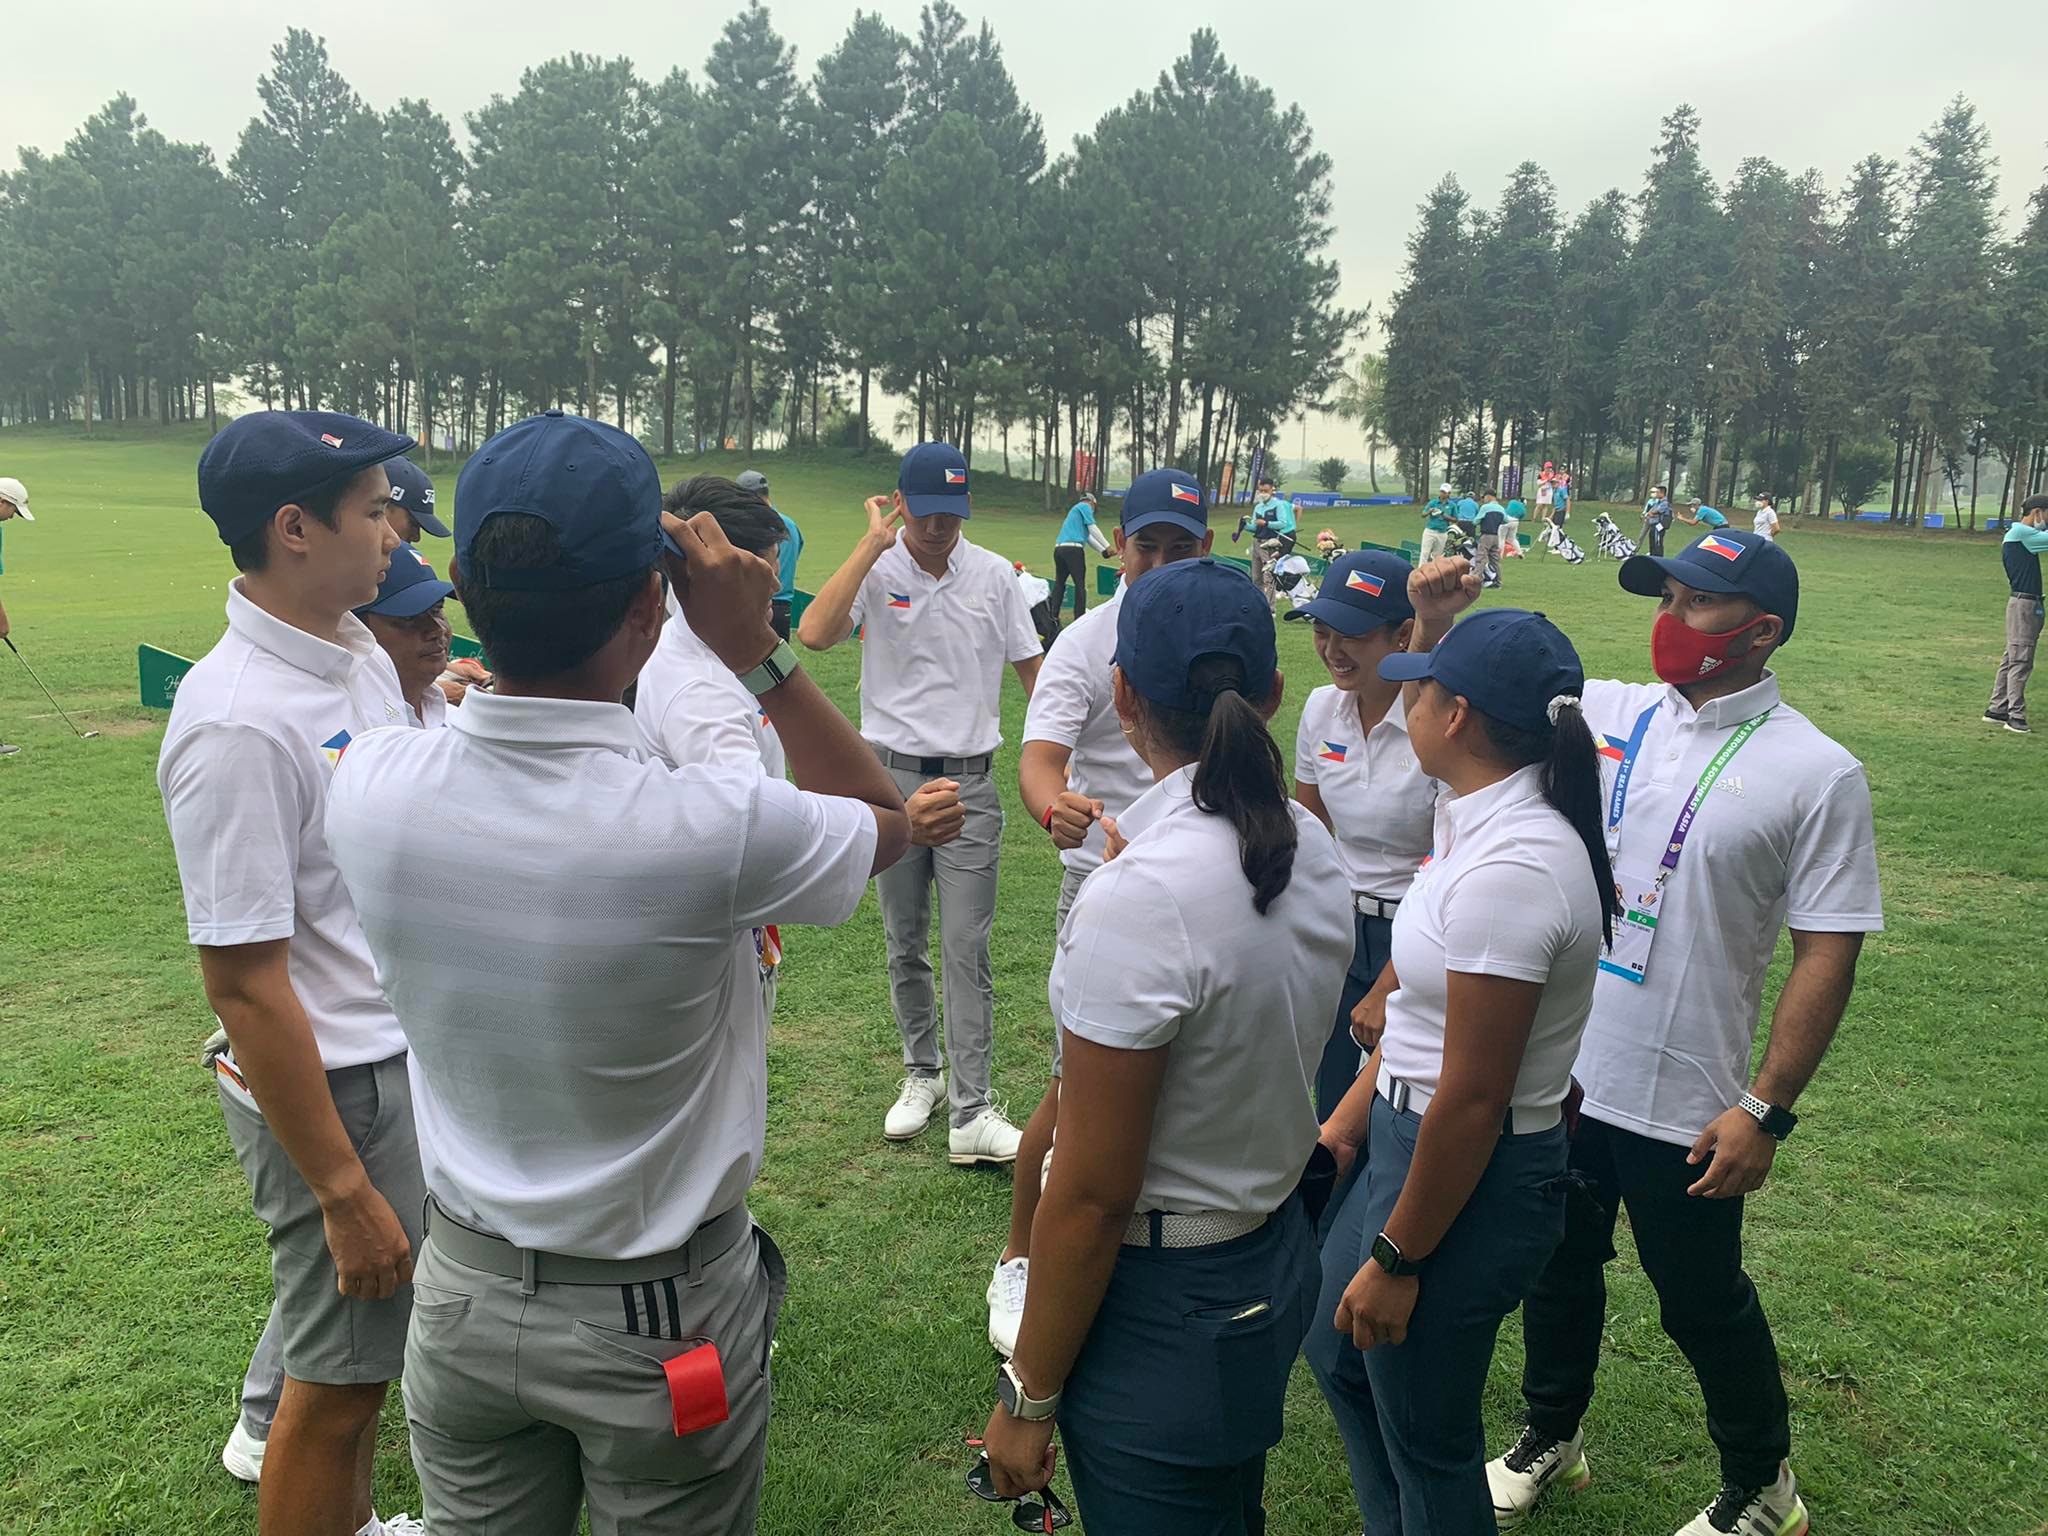 The national golfers huddle before the start of their round. —JONG ARCANO